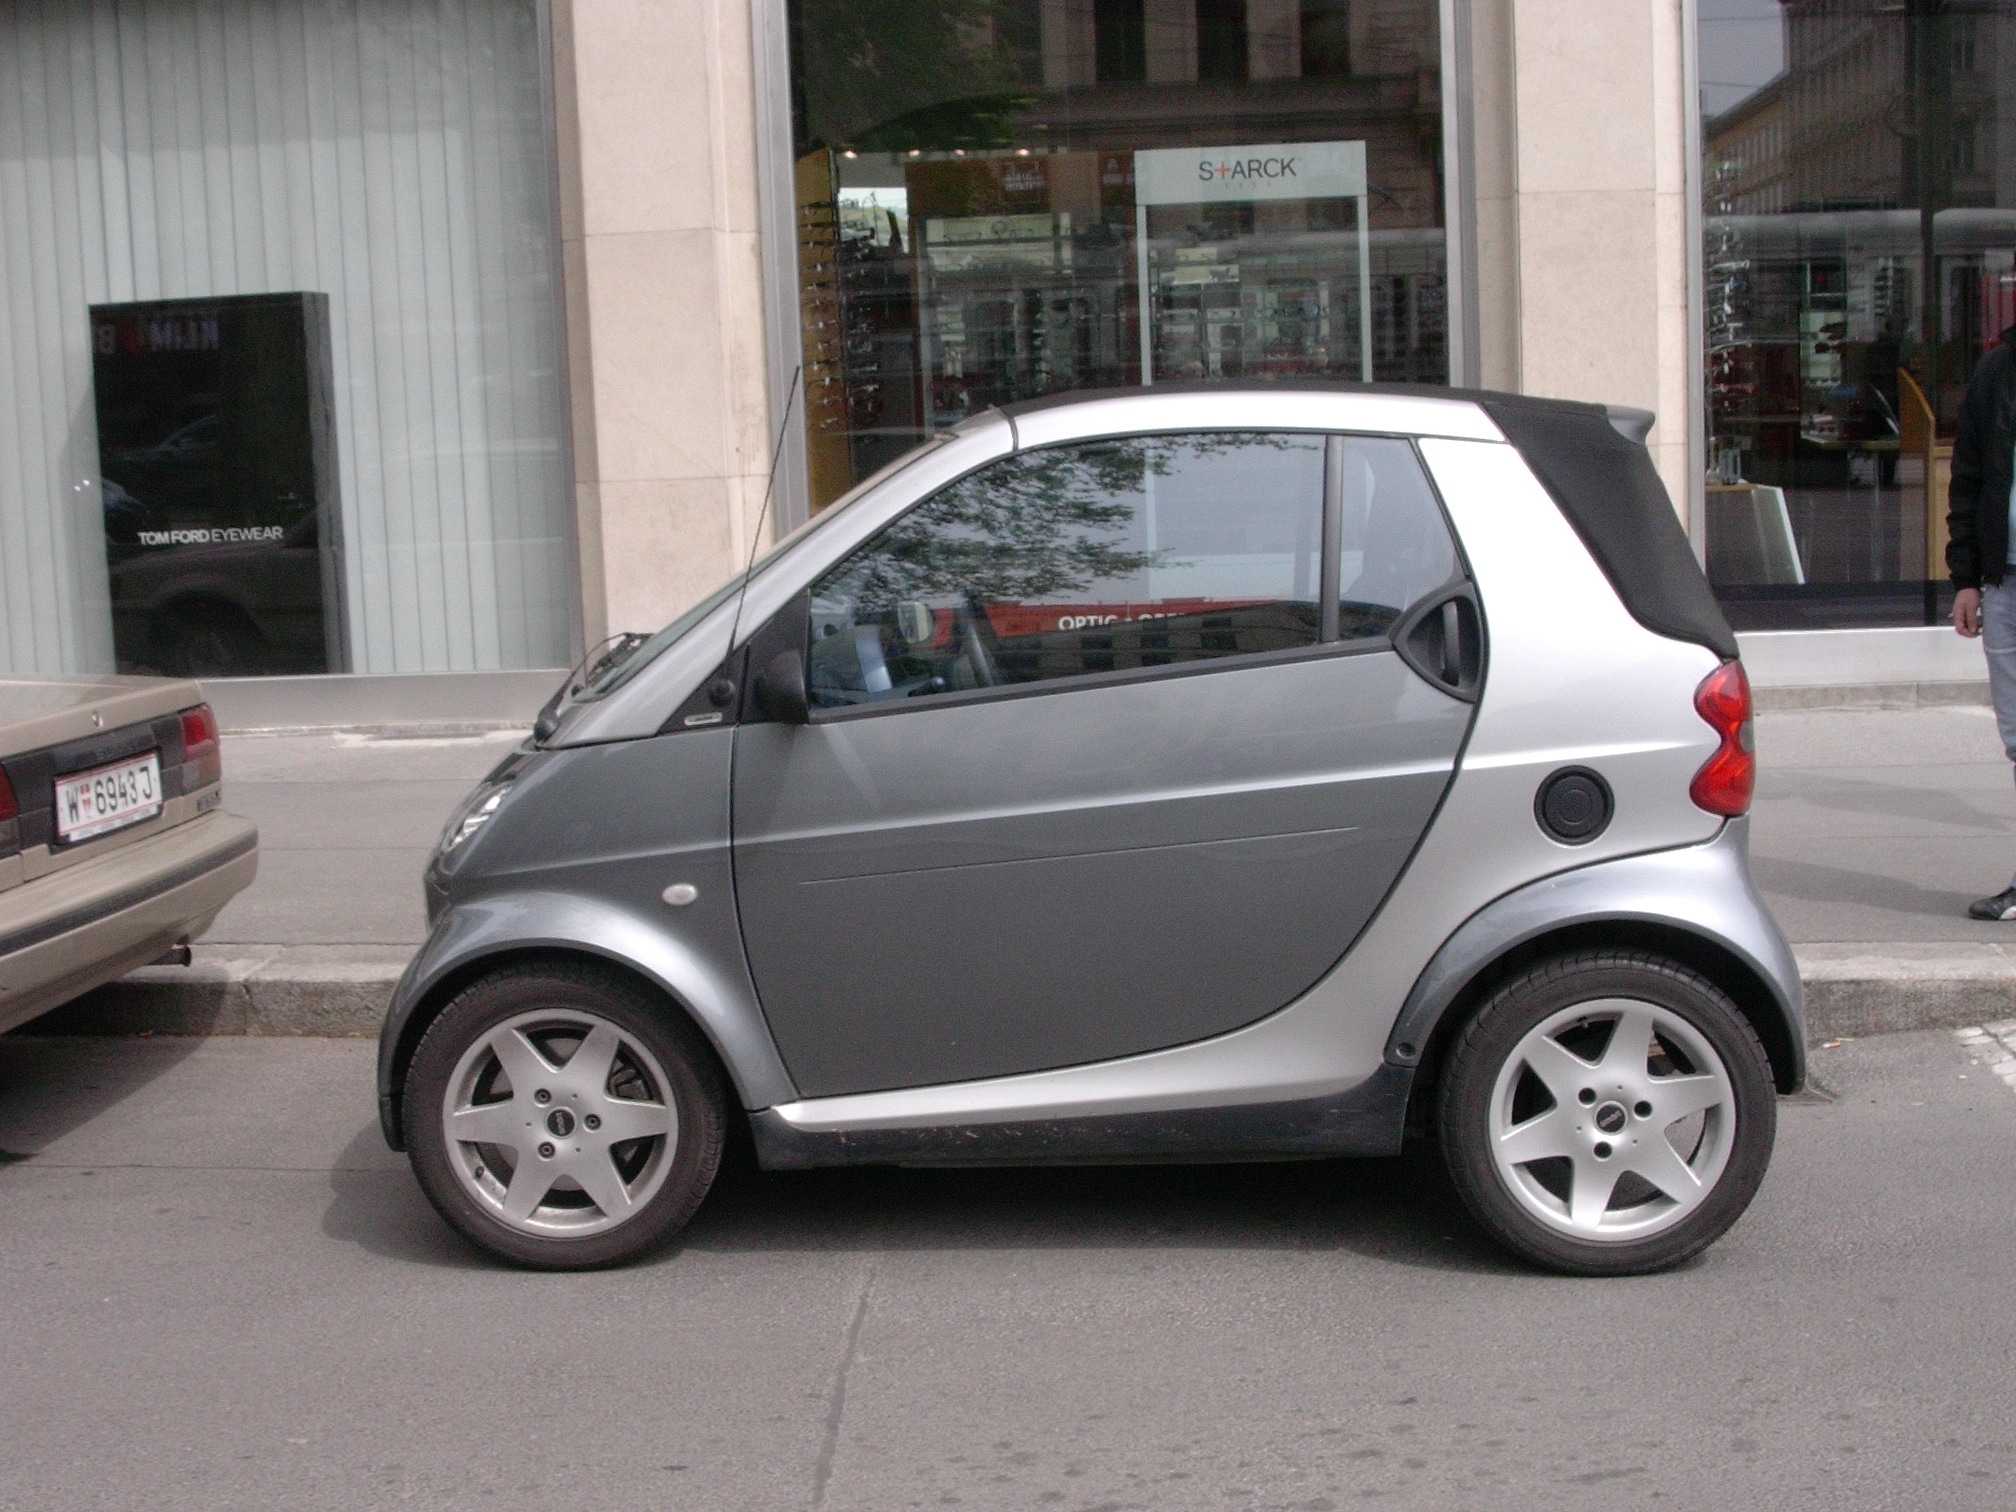 LHD Smart Car with left hand wheel